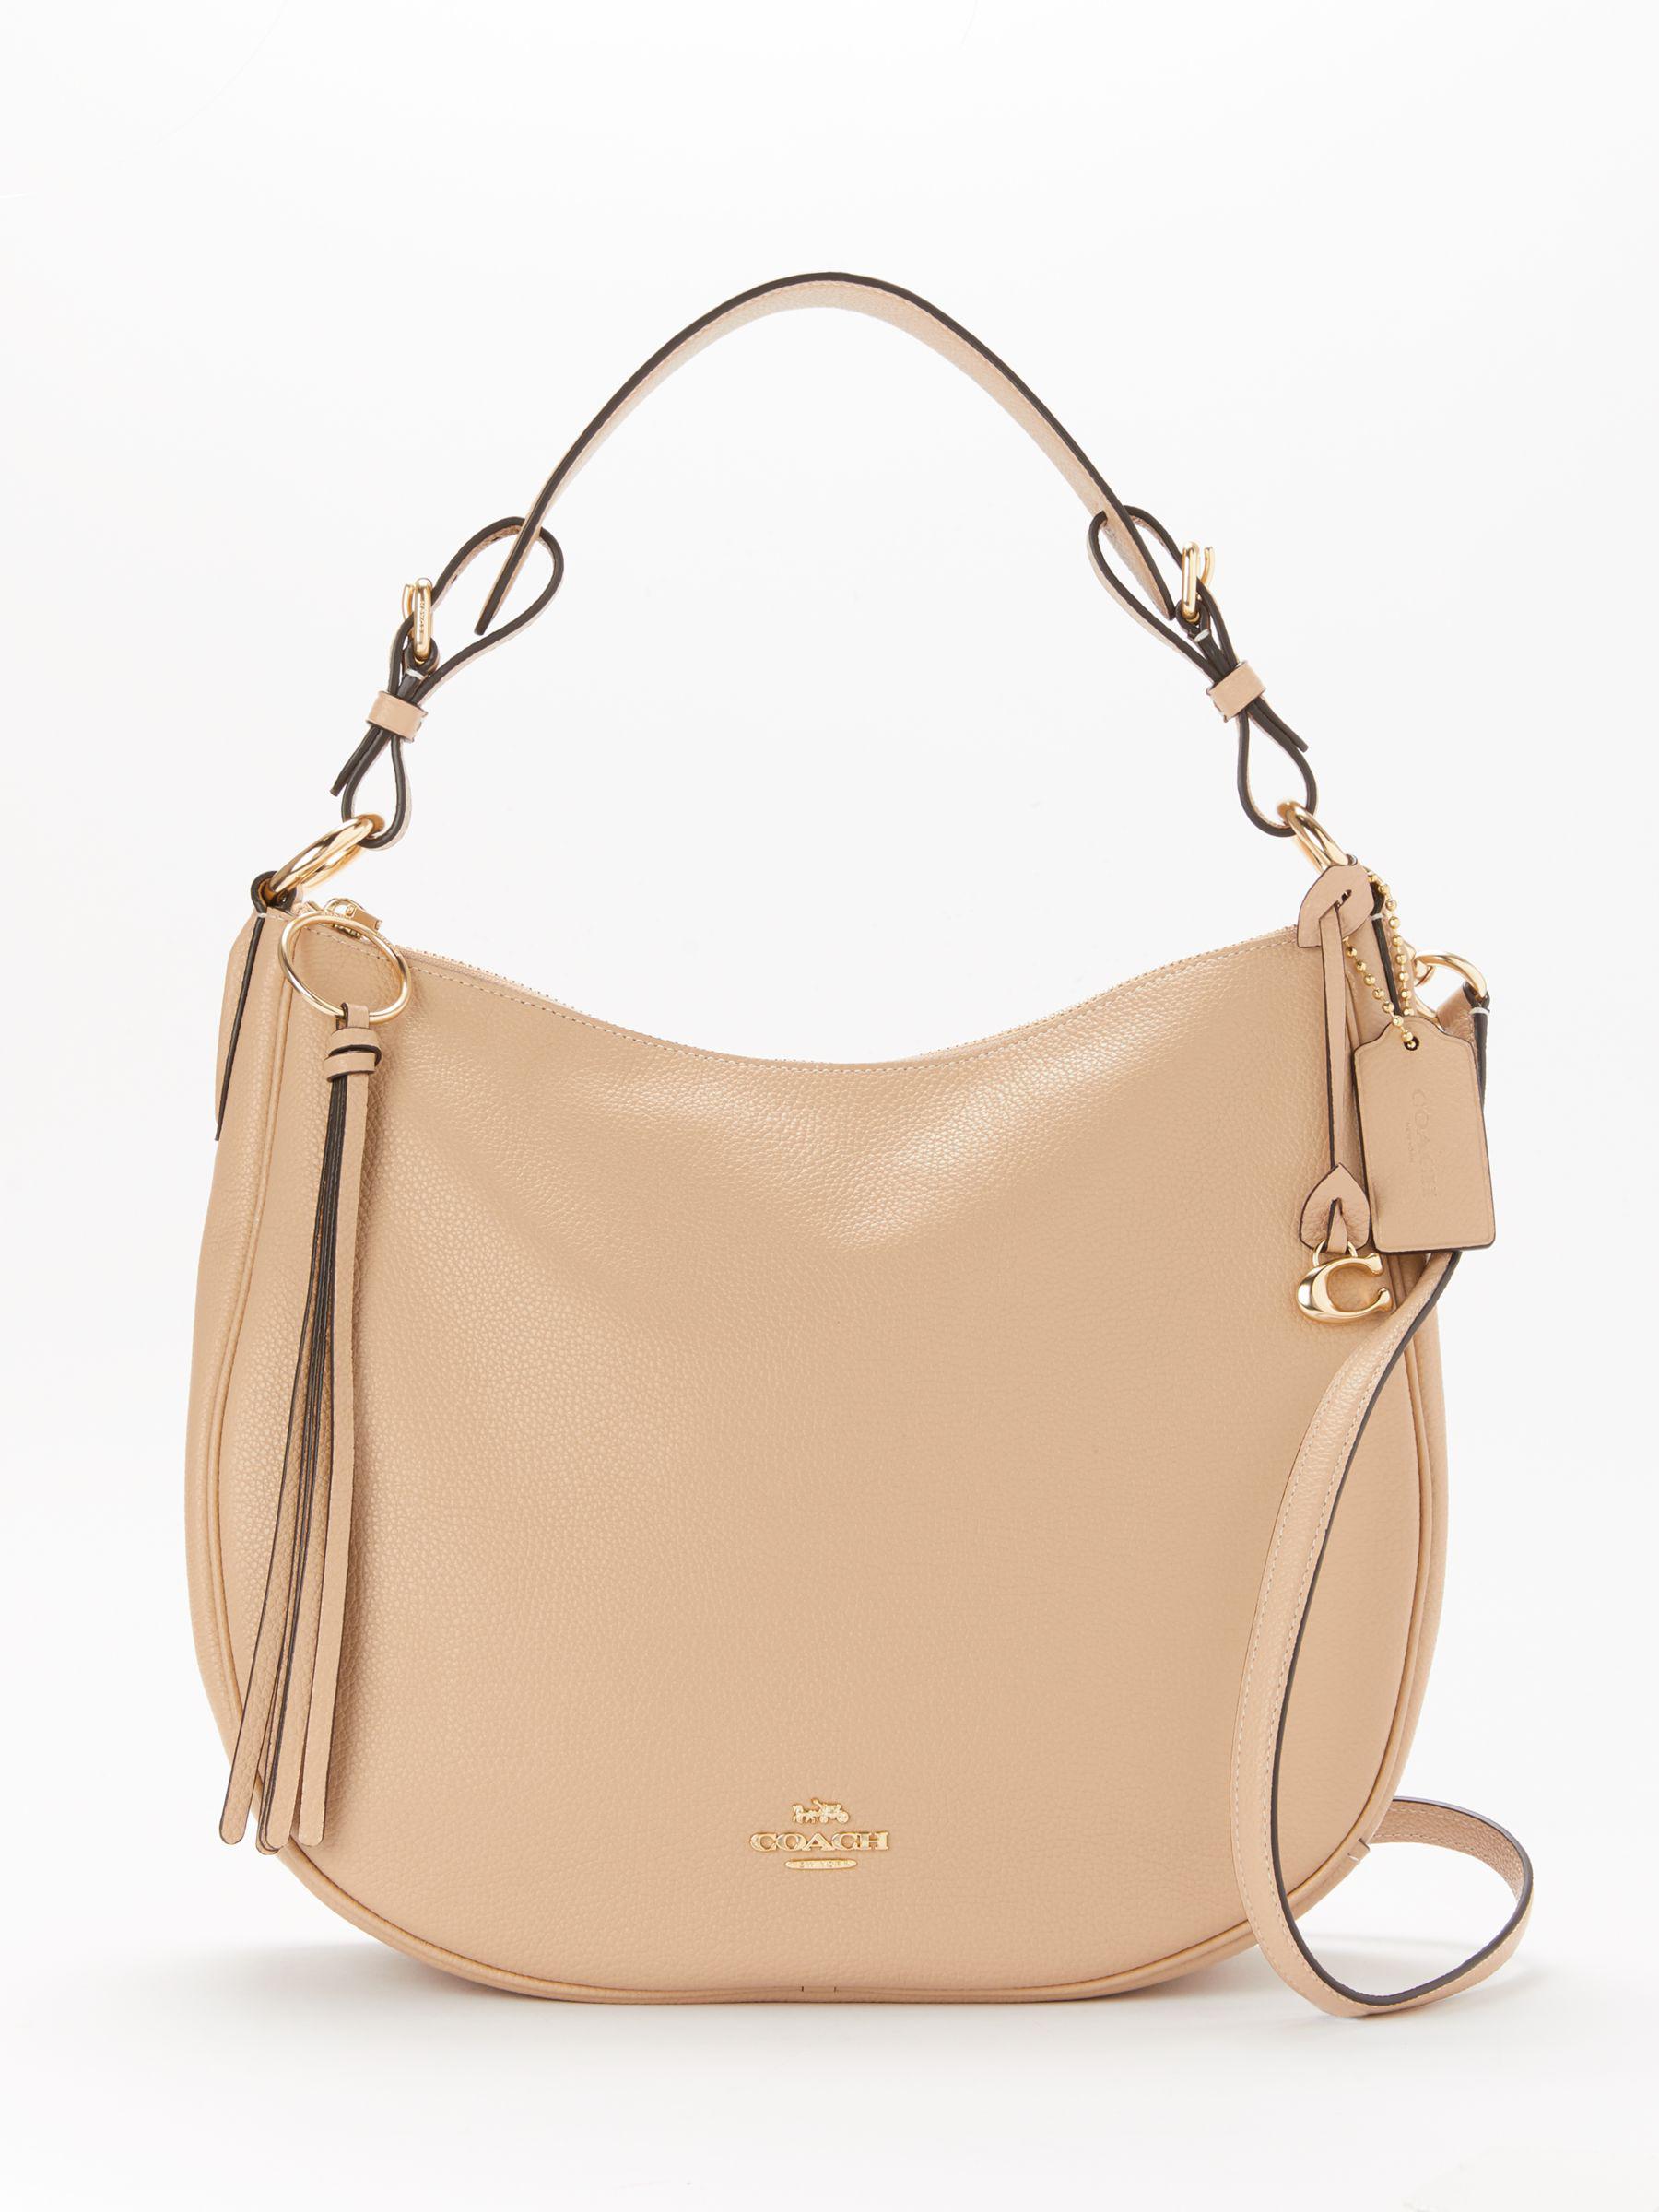 COACH Sutton Pebbled Leather Hobo Bag - Lyst